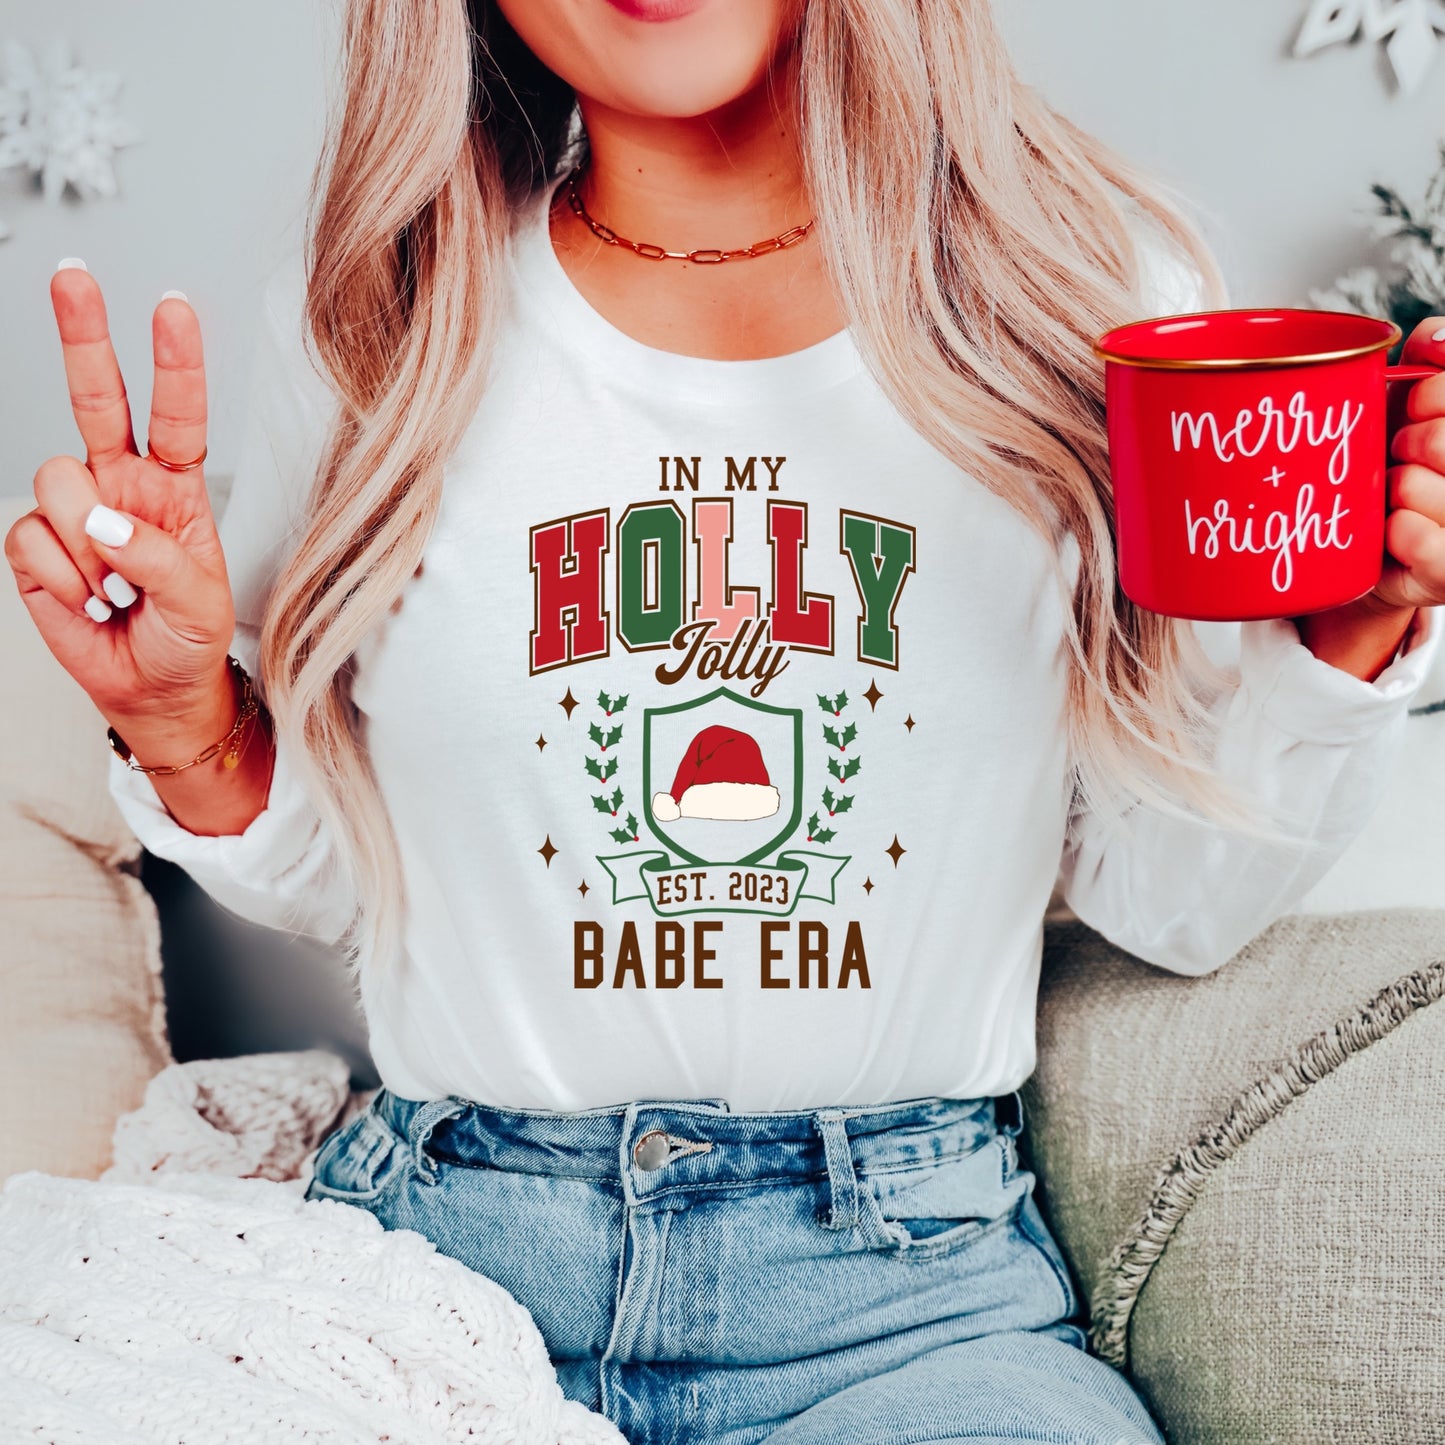 "In My Holly Jolly Babe" Preppy Christmas Iron On Heat Transfer